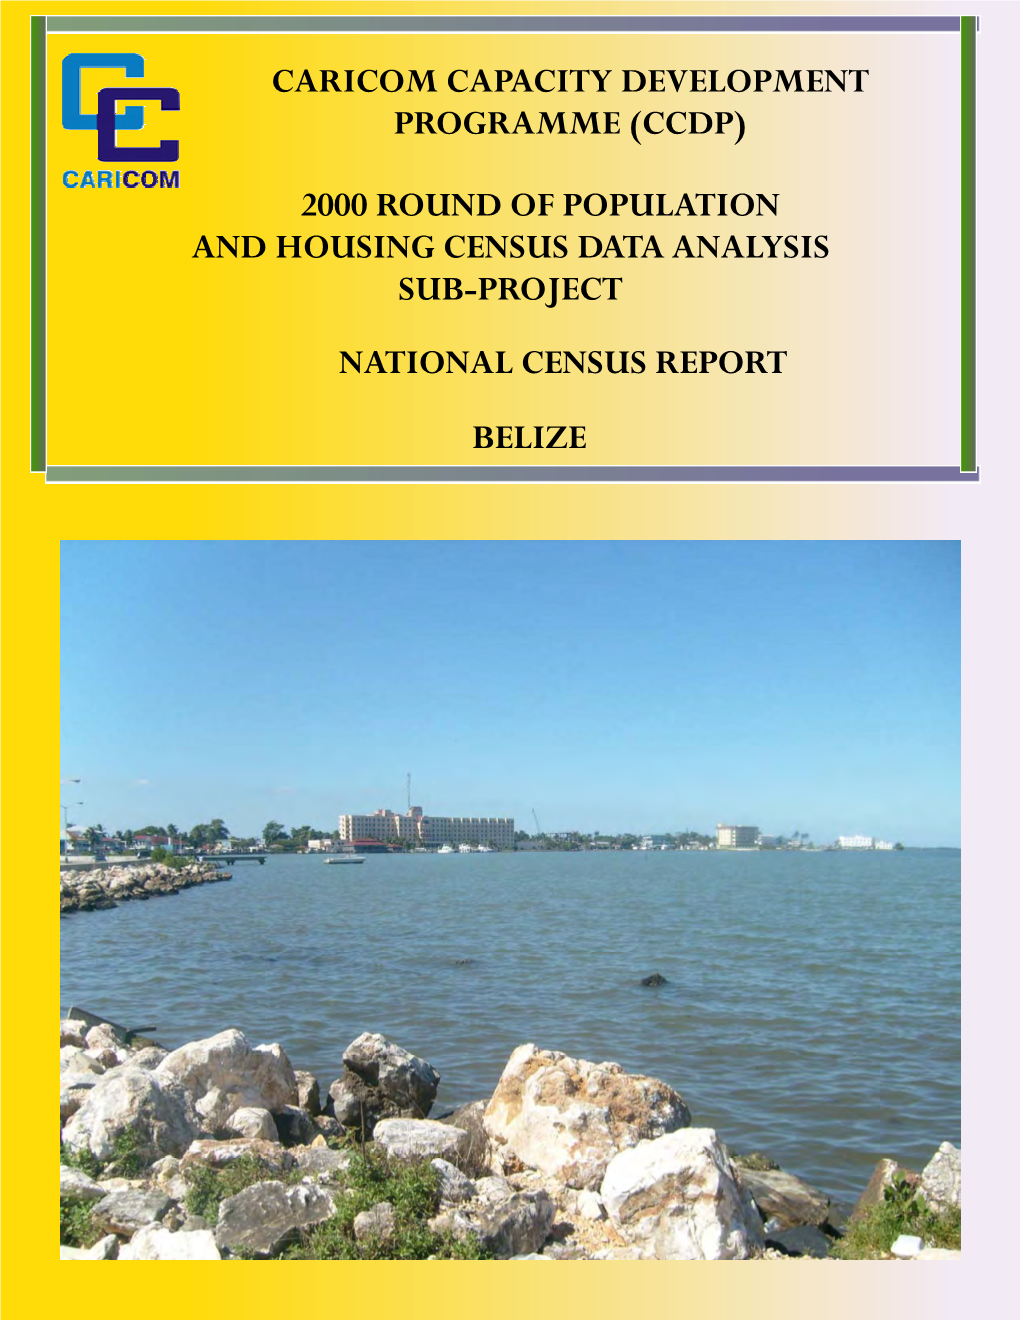 Belize National Census Report 2000 Round Of